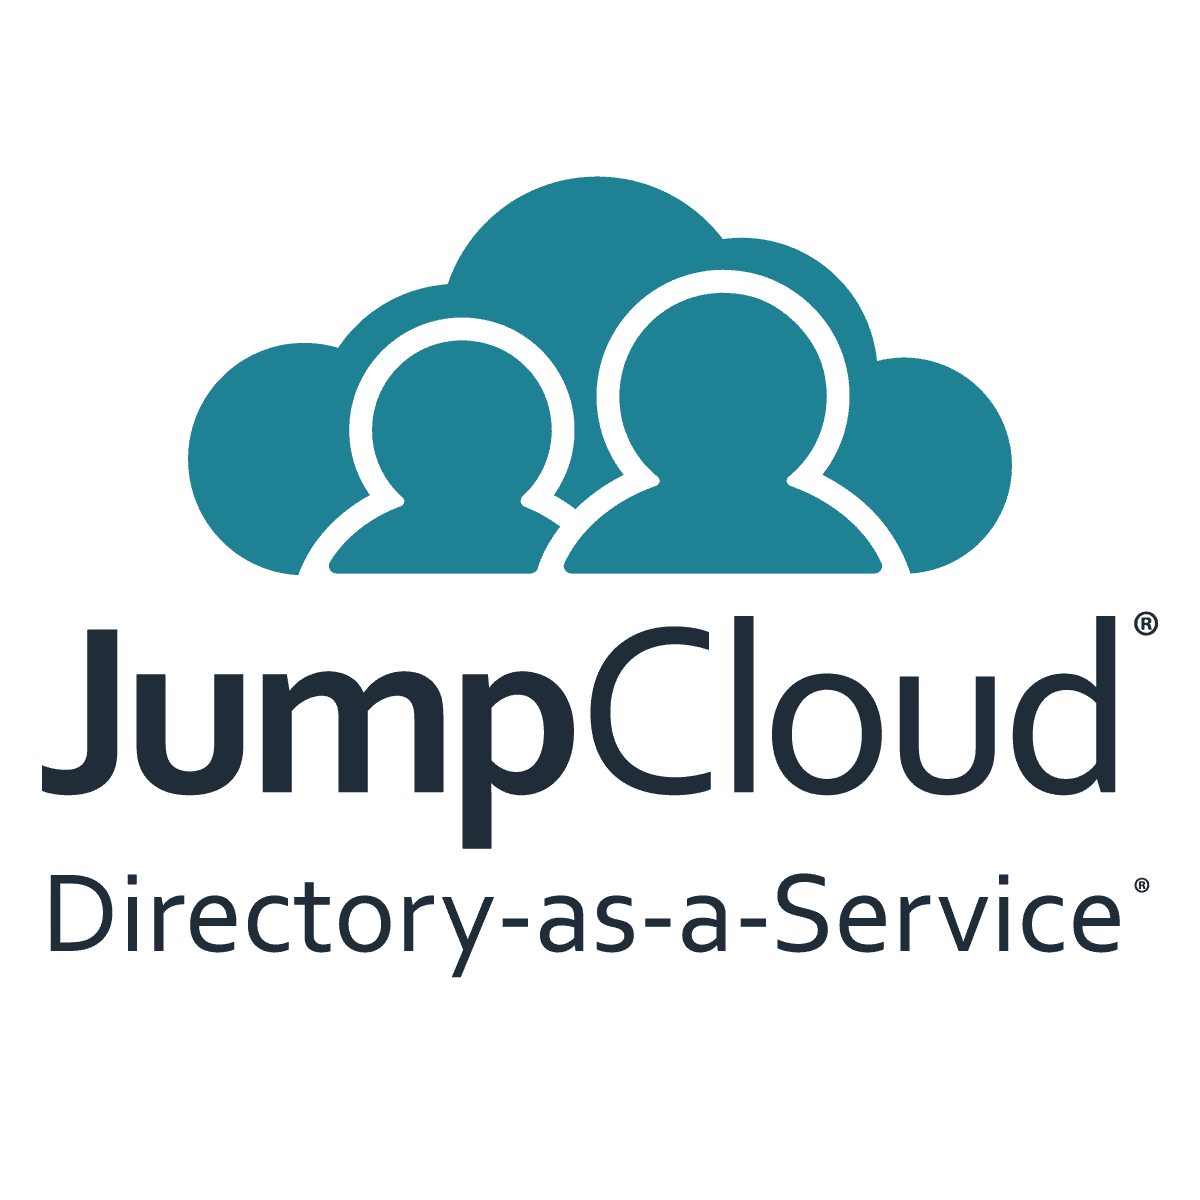 Jumpcloud Statistics and Facts 2022